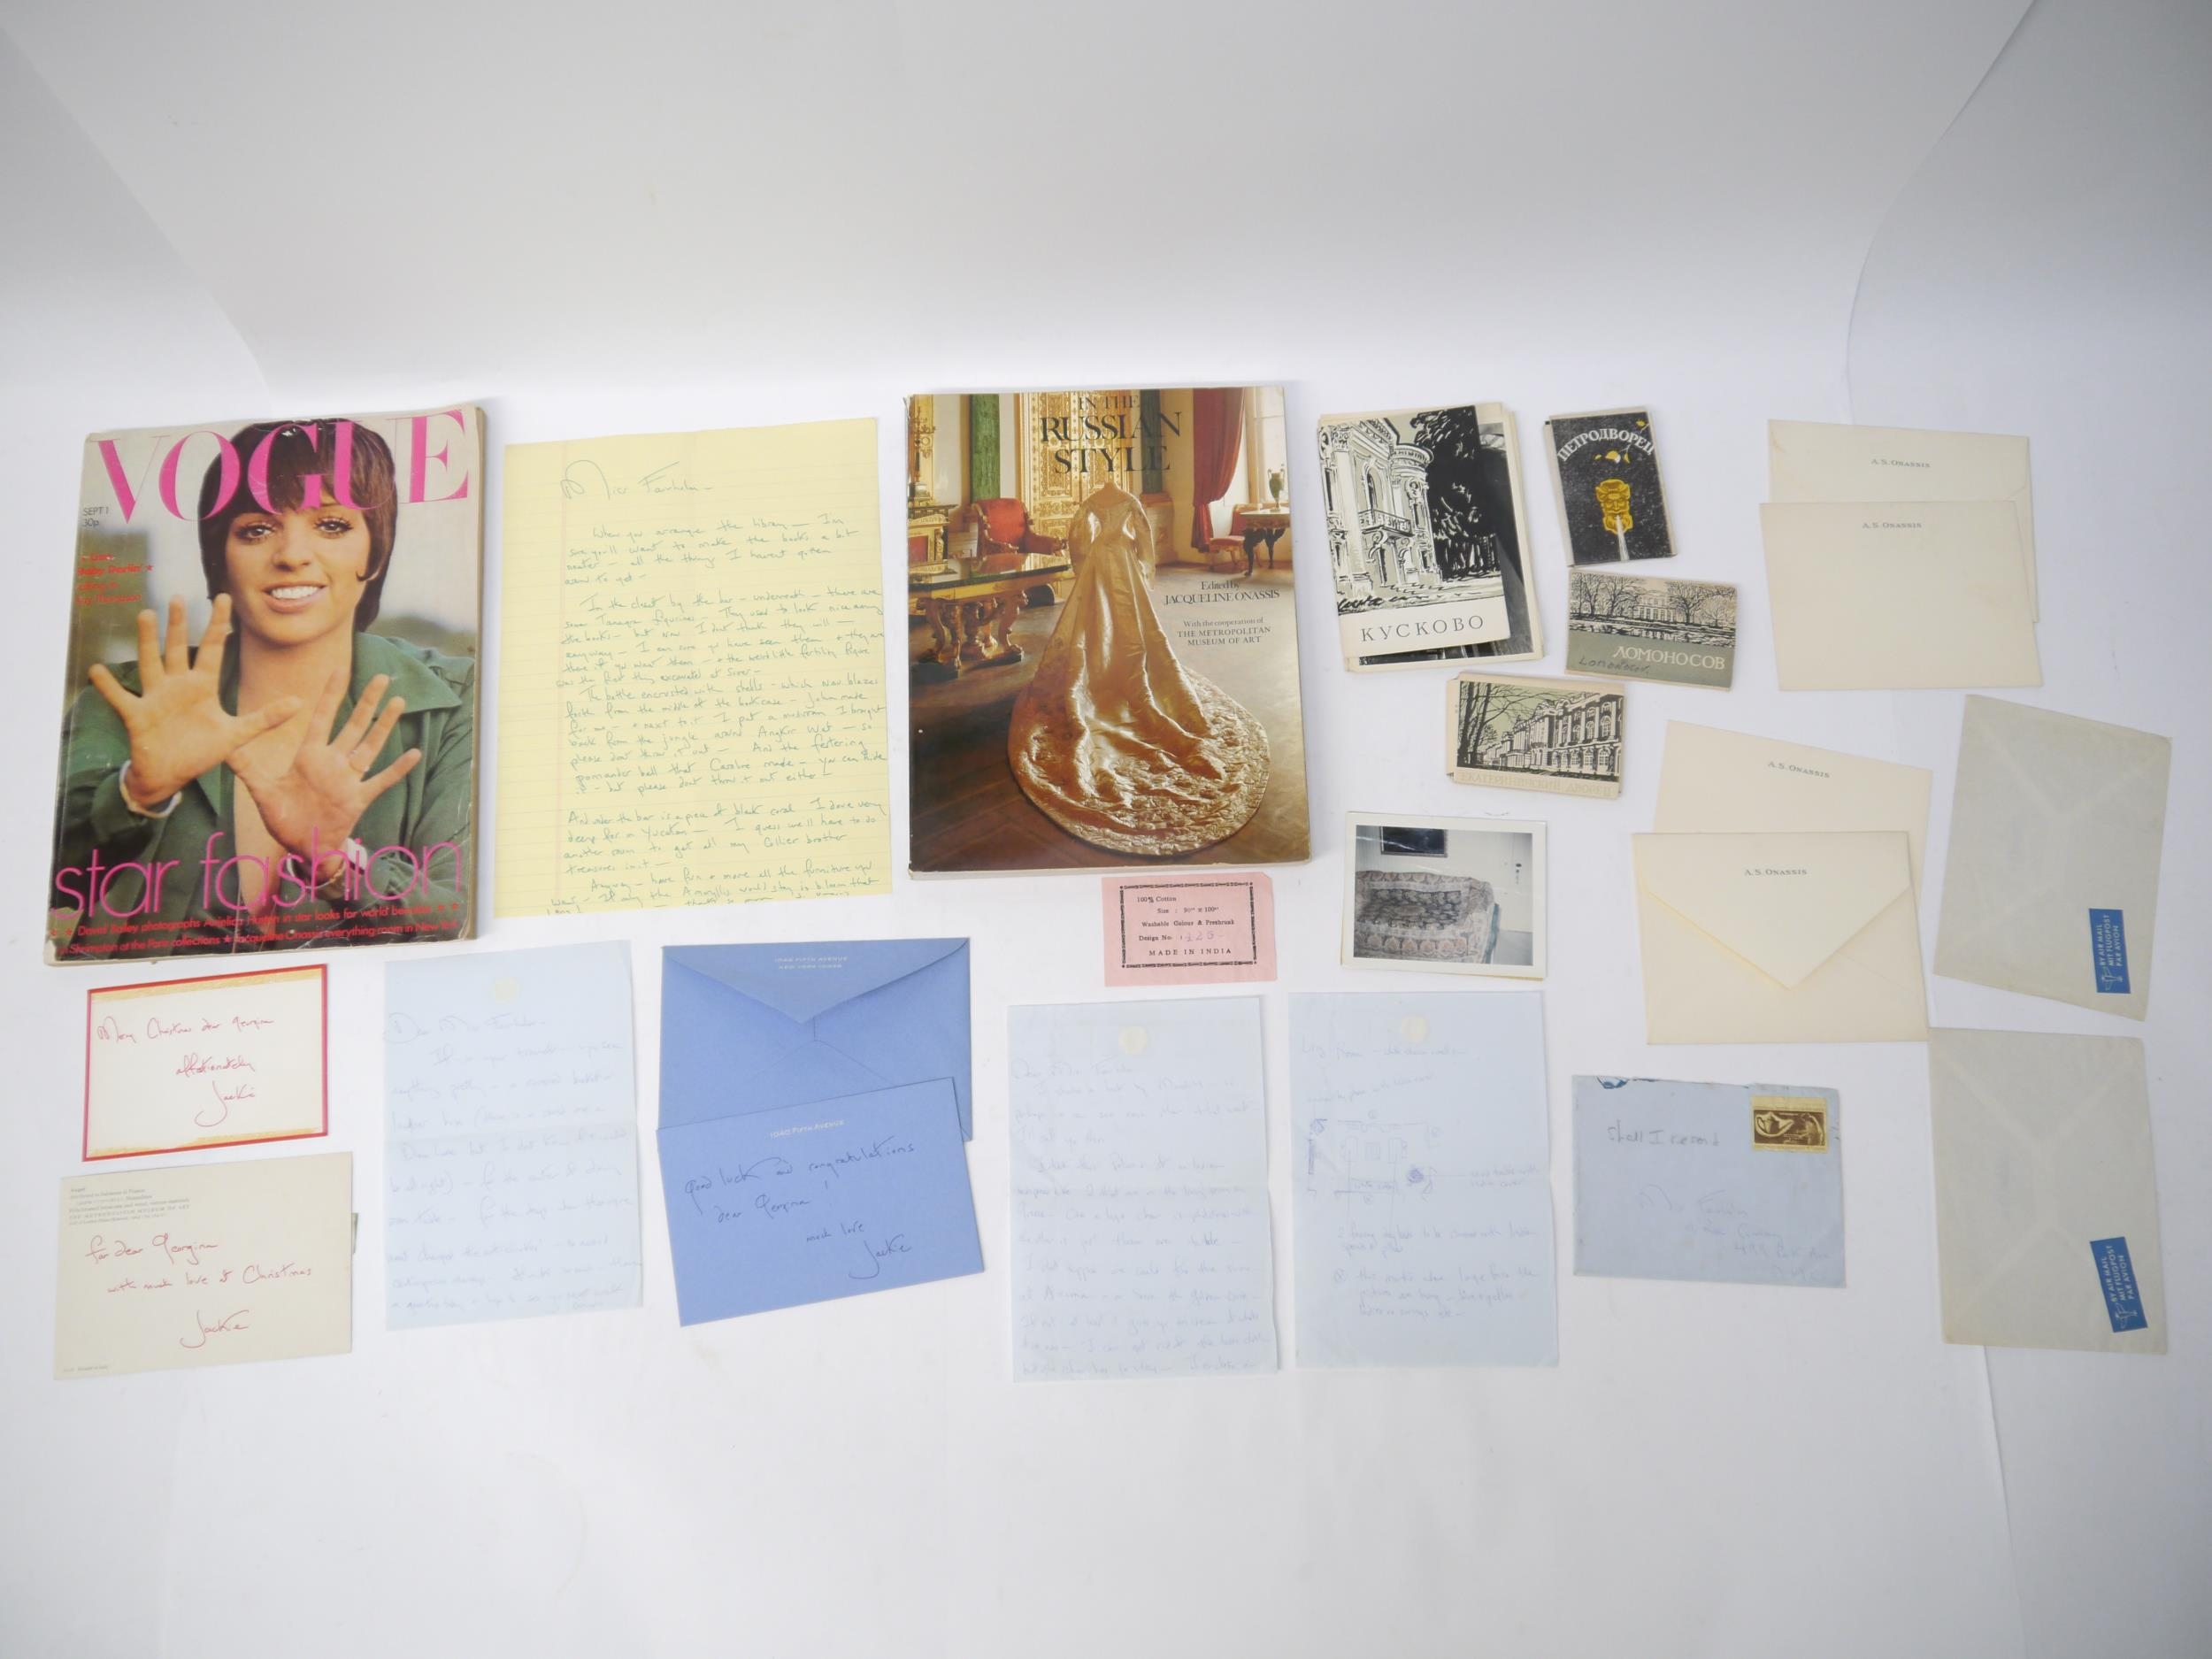 Jacqueline Kennedy Onassis (née Bouvier, 1929-1994.) A collection of correspondence including